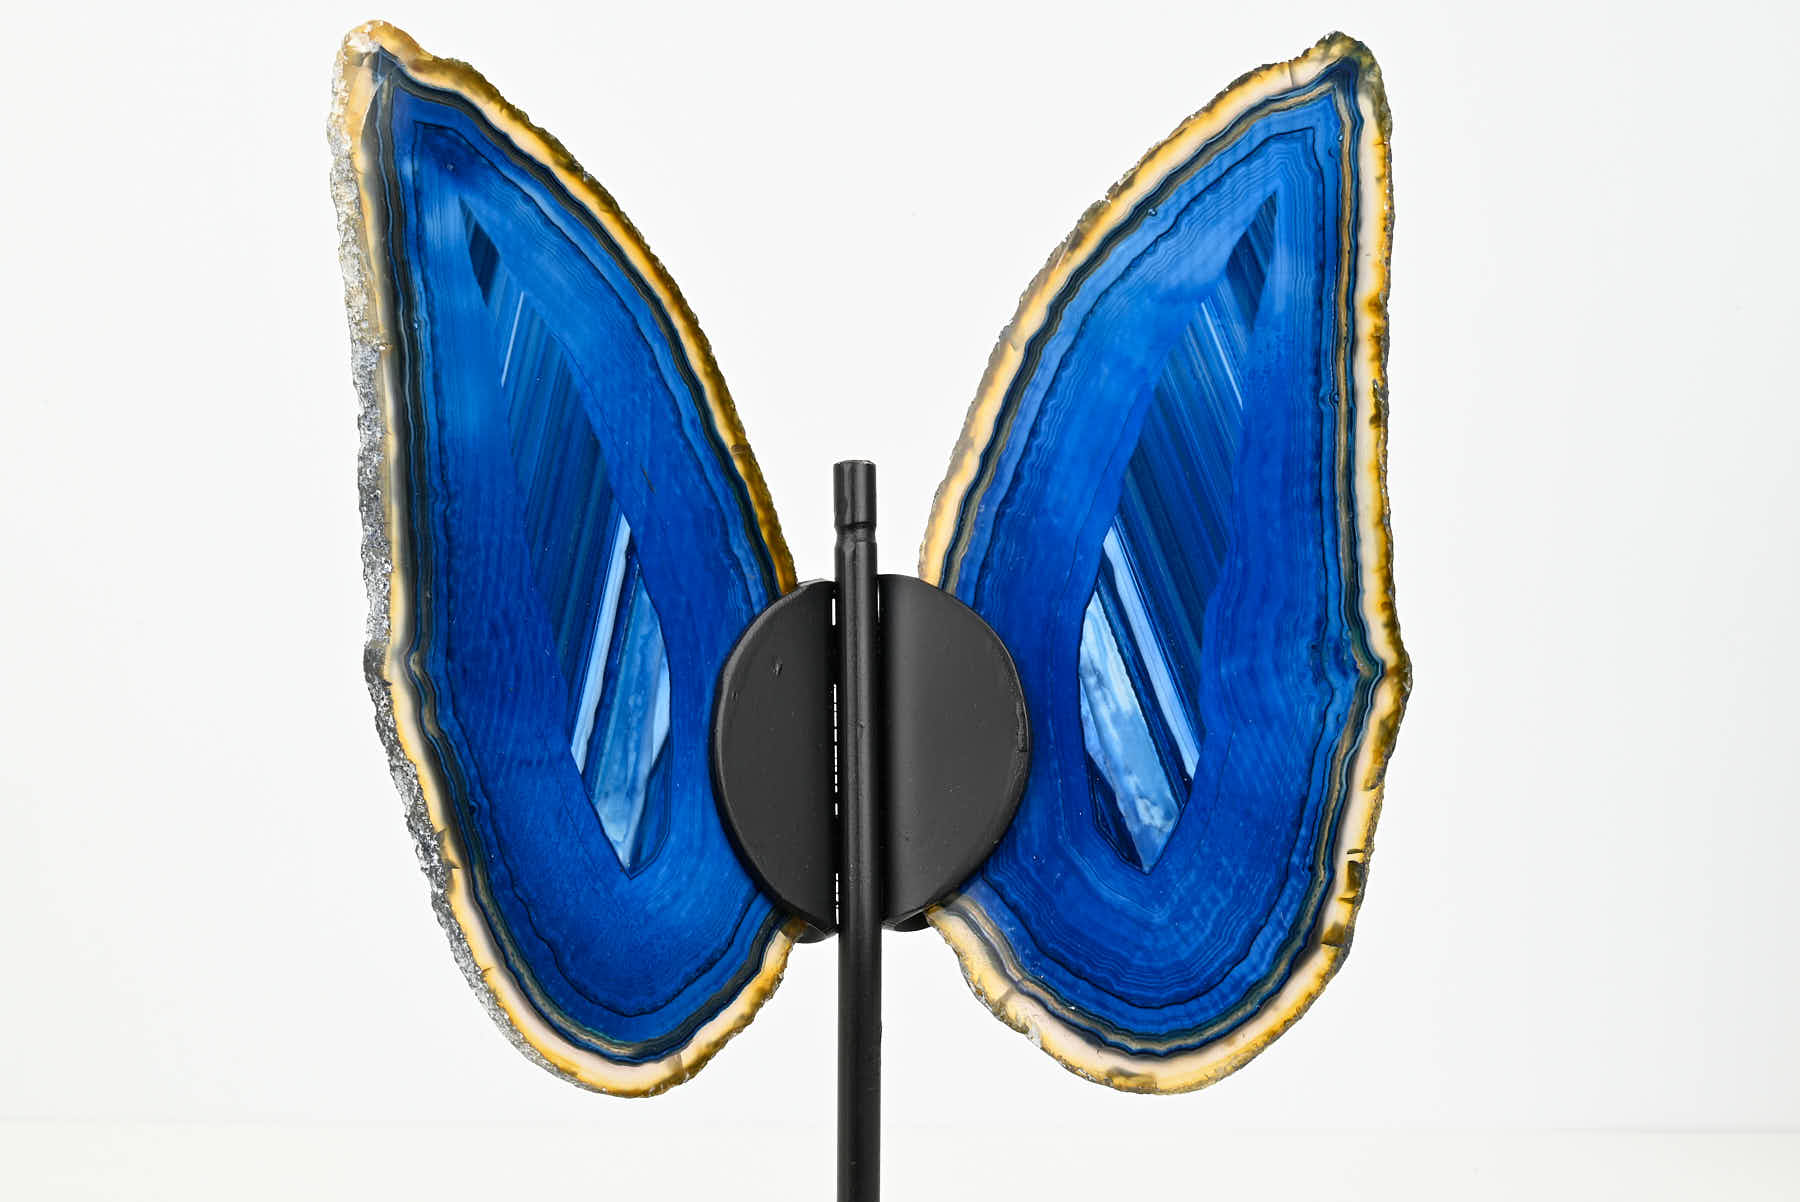 Blue Agate Butterfly on Stand - 0.51kg and 21cm Tall - #BUBLUE-10015